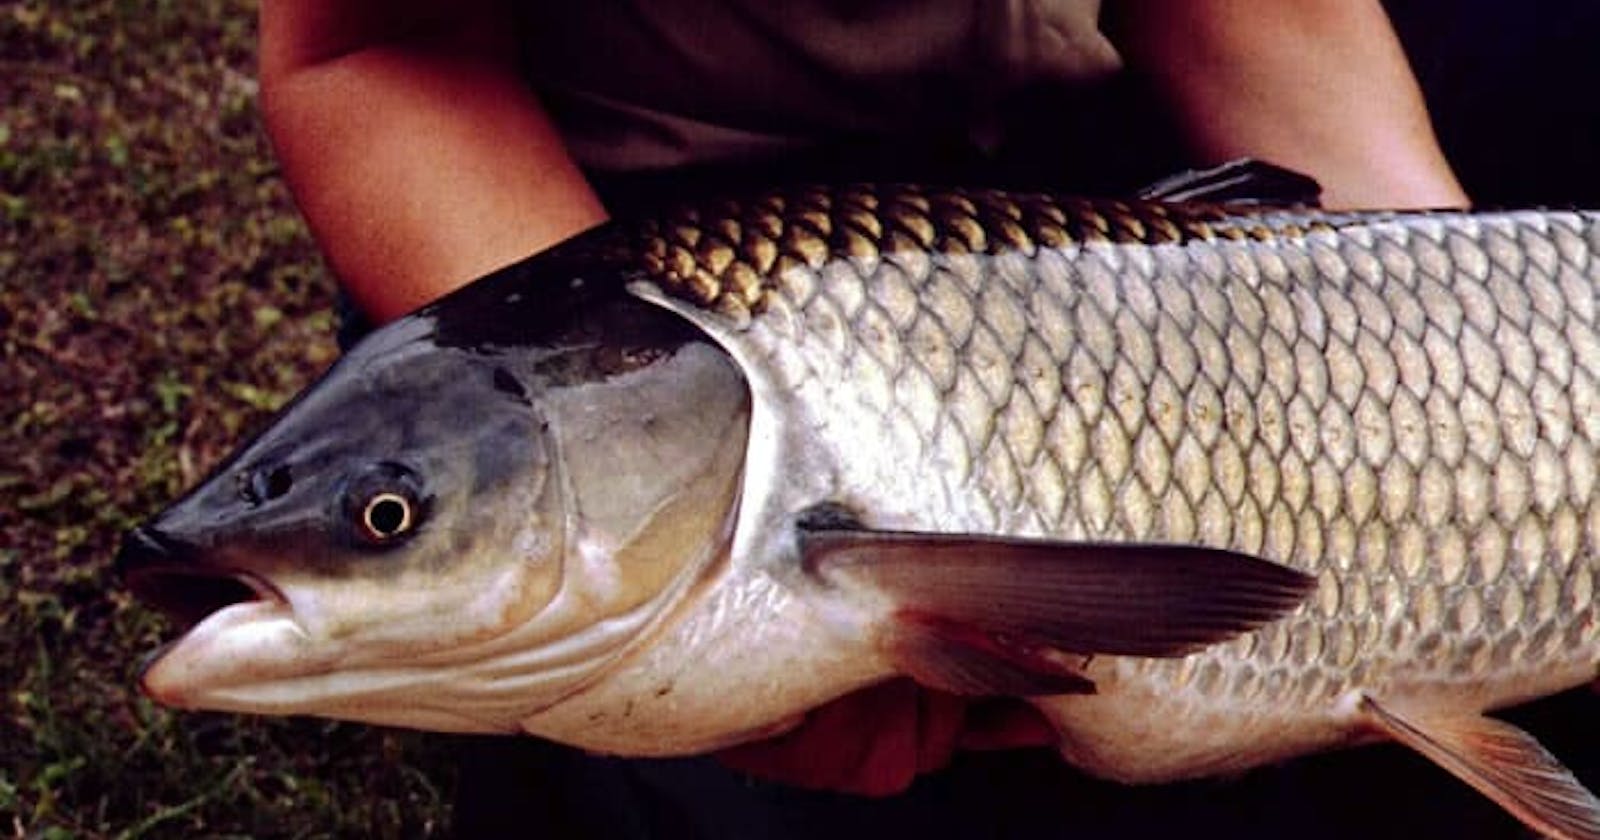 How to Catch White Amur Trout / Grass Carp?